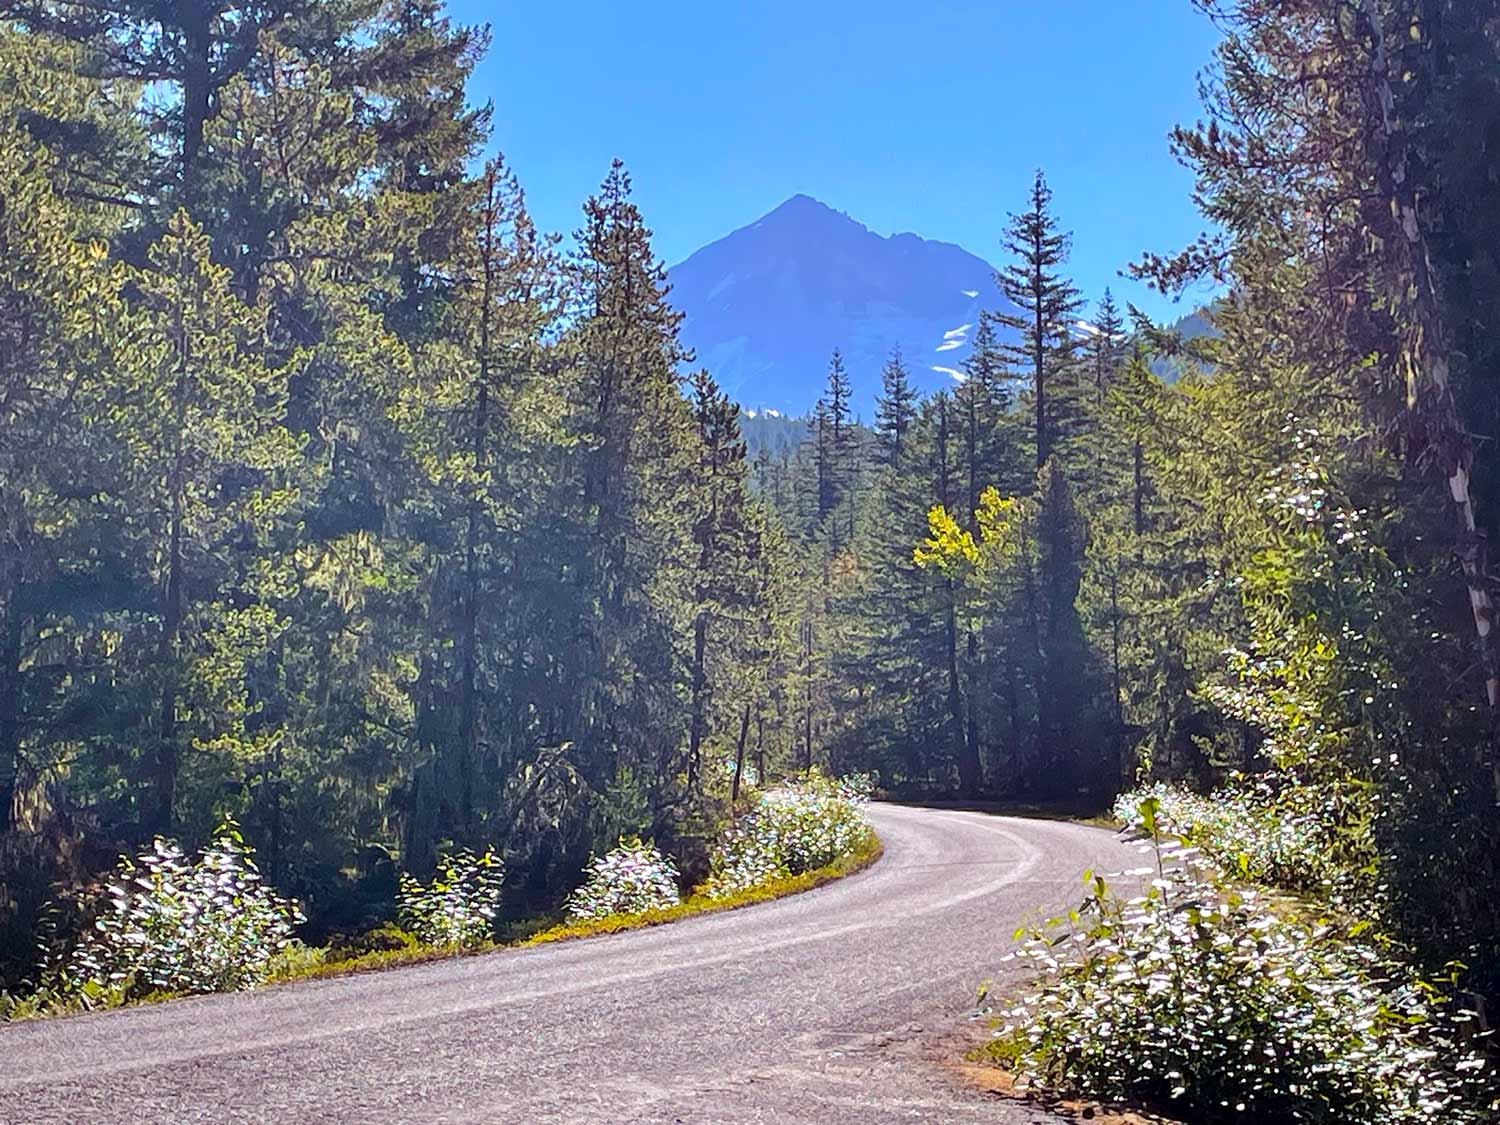 A road through the forest with the blue profile of Mount Hood rising in the background